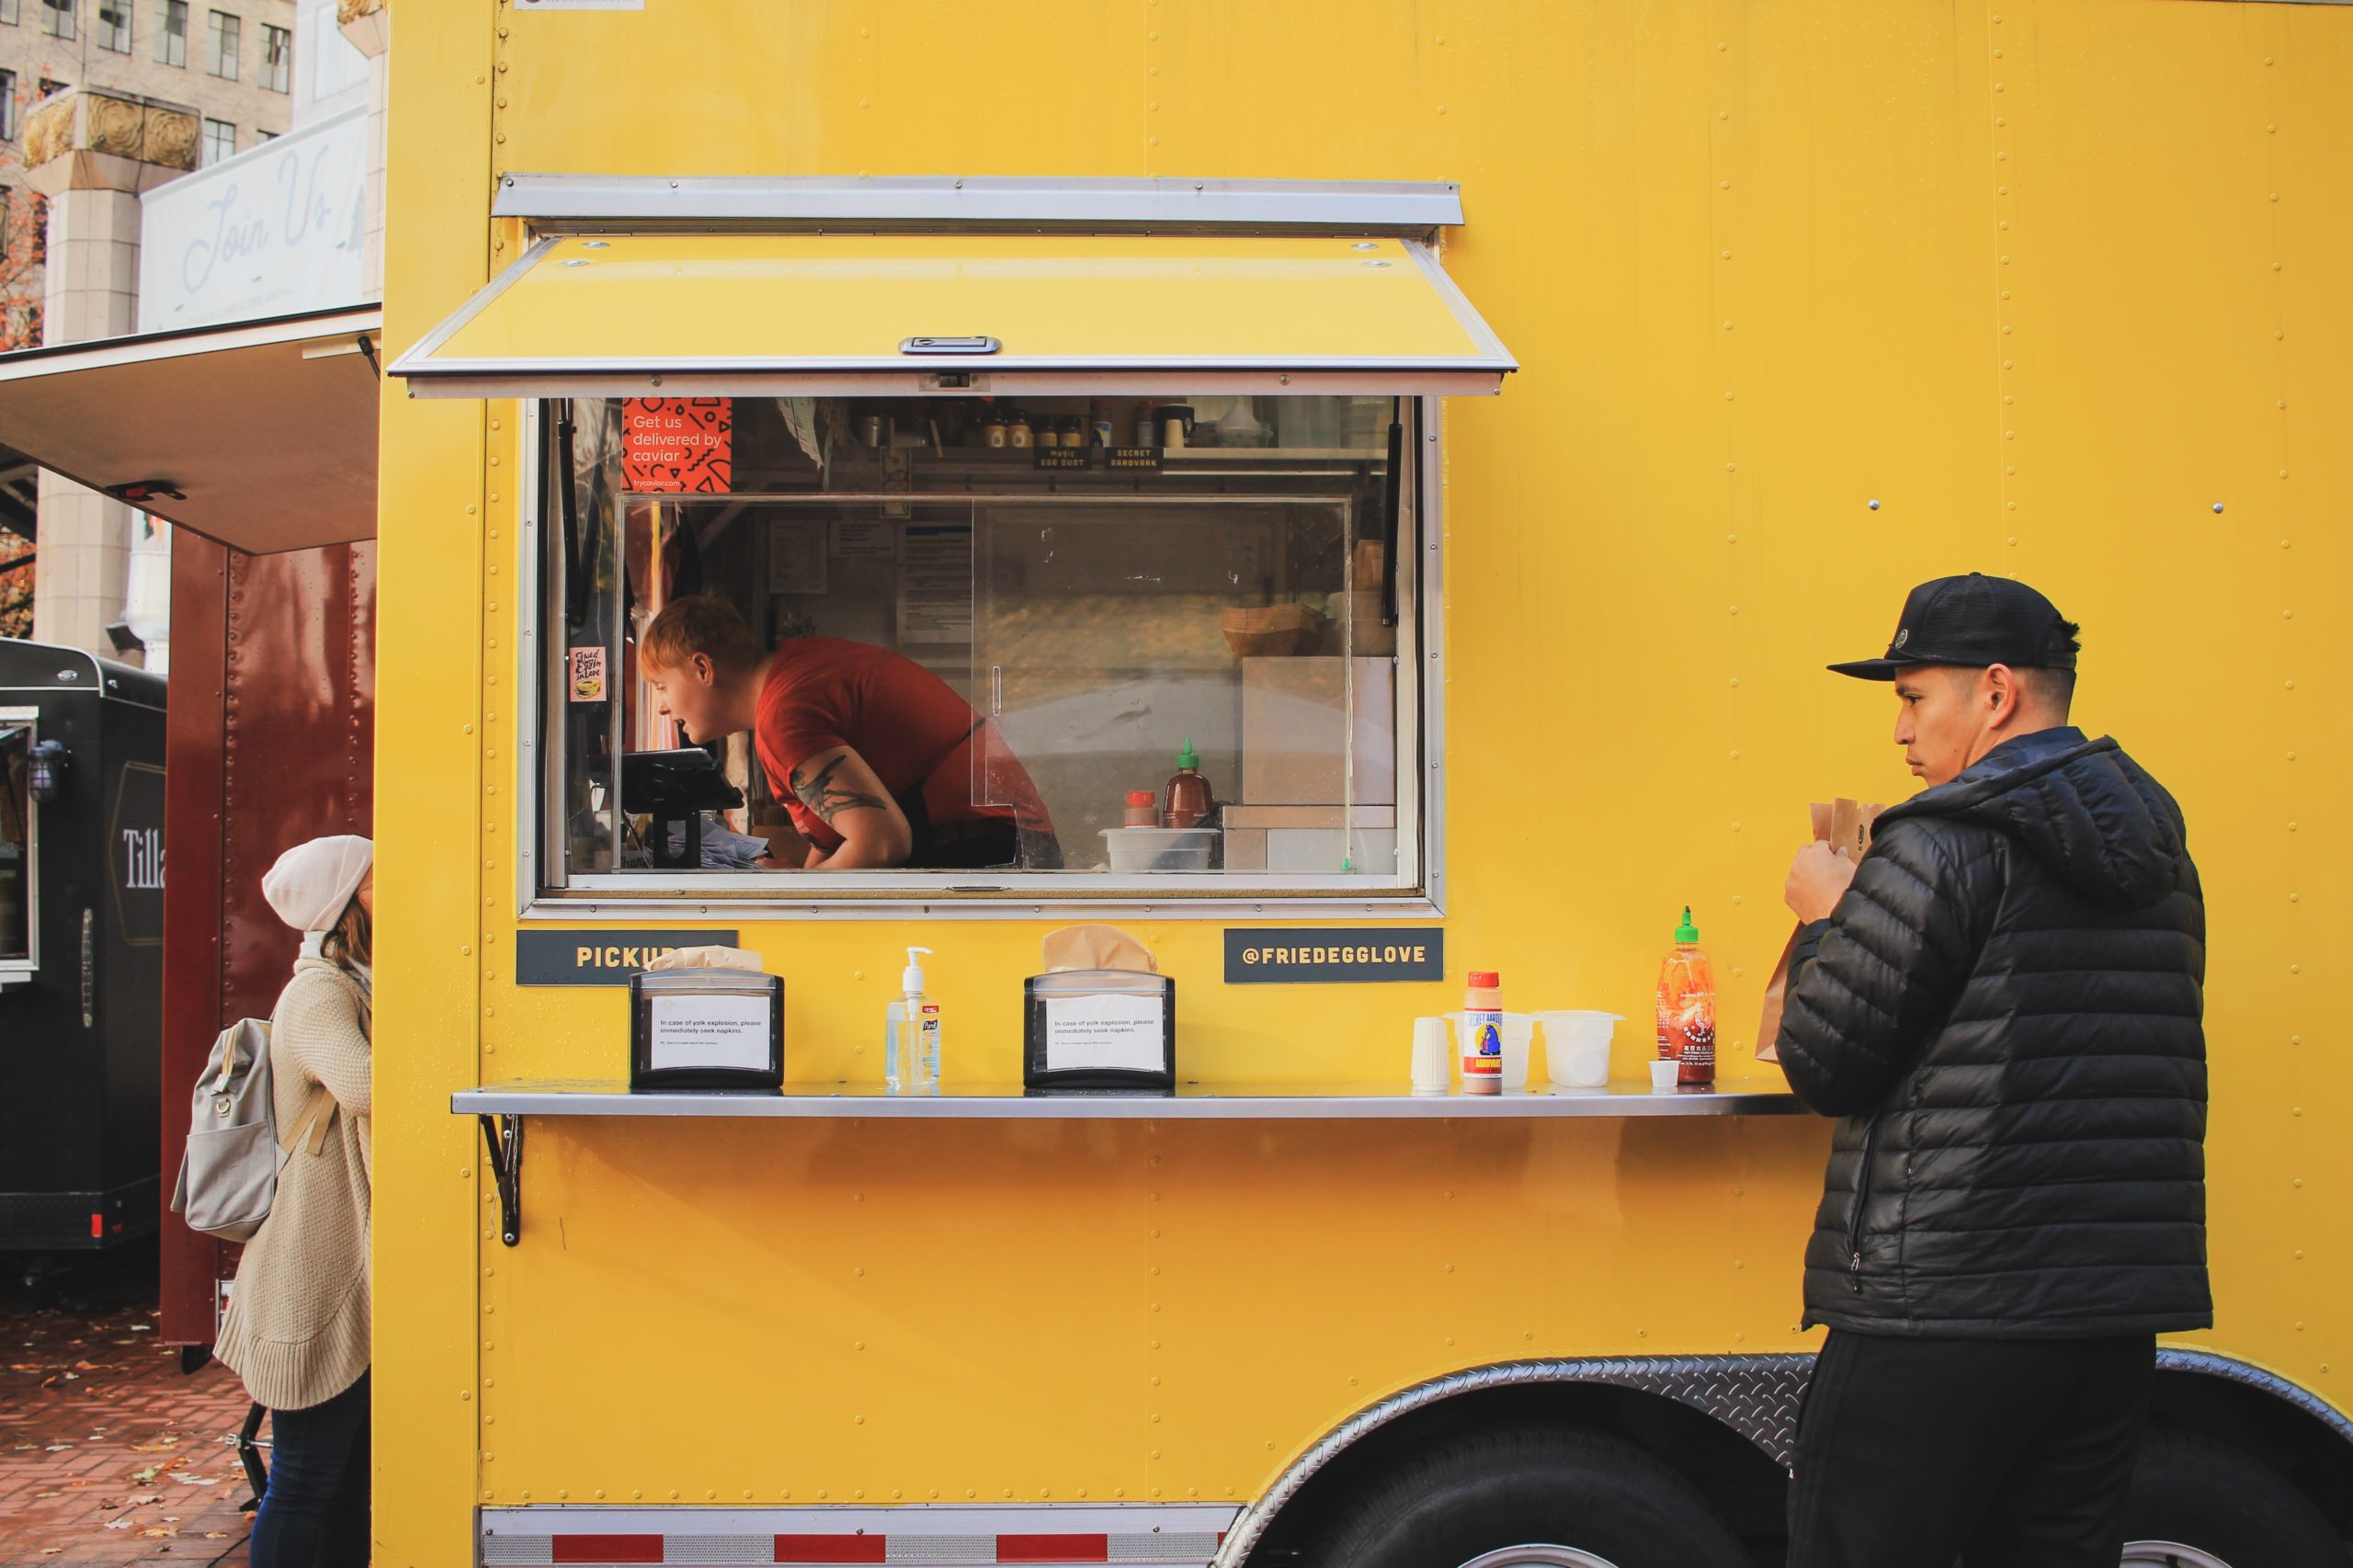 Launch-a-Food-Truck-Business-and-Not-a-Brick-and-Mortar-Restaurant-–-Here-is-Why-Foodtruckmenu.net-b